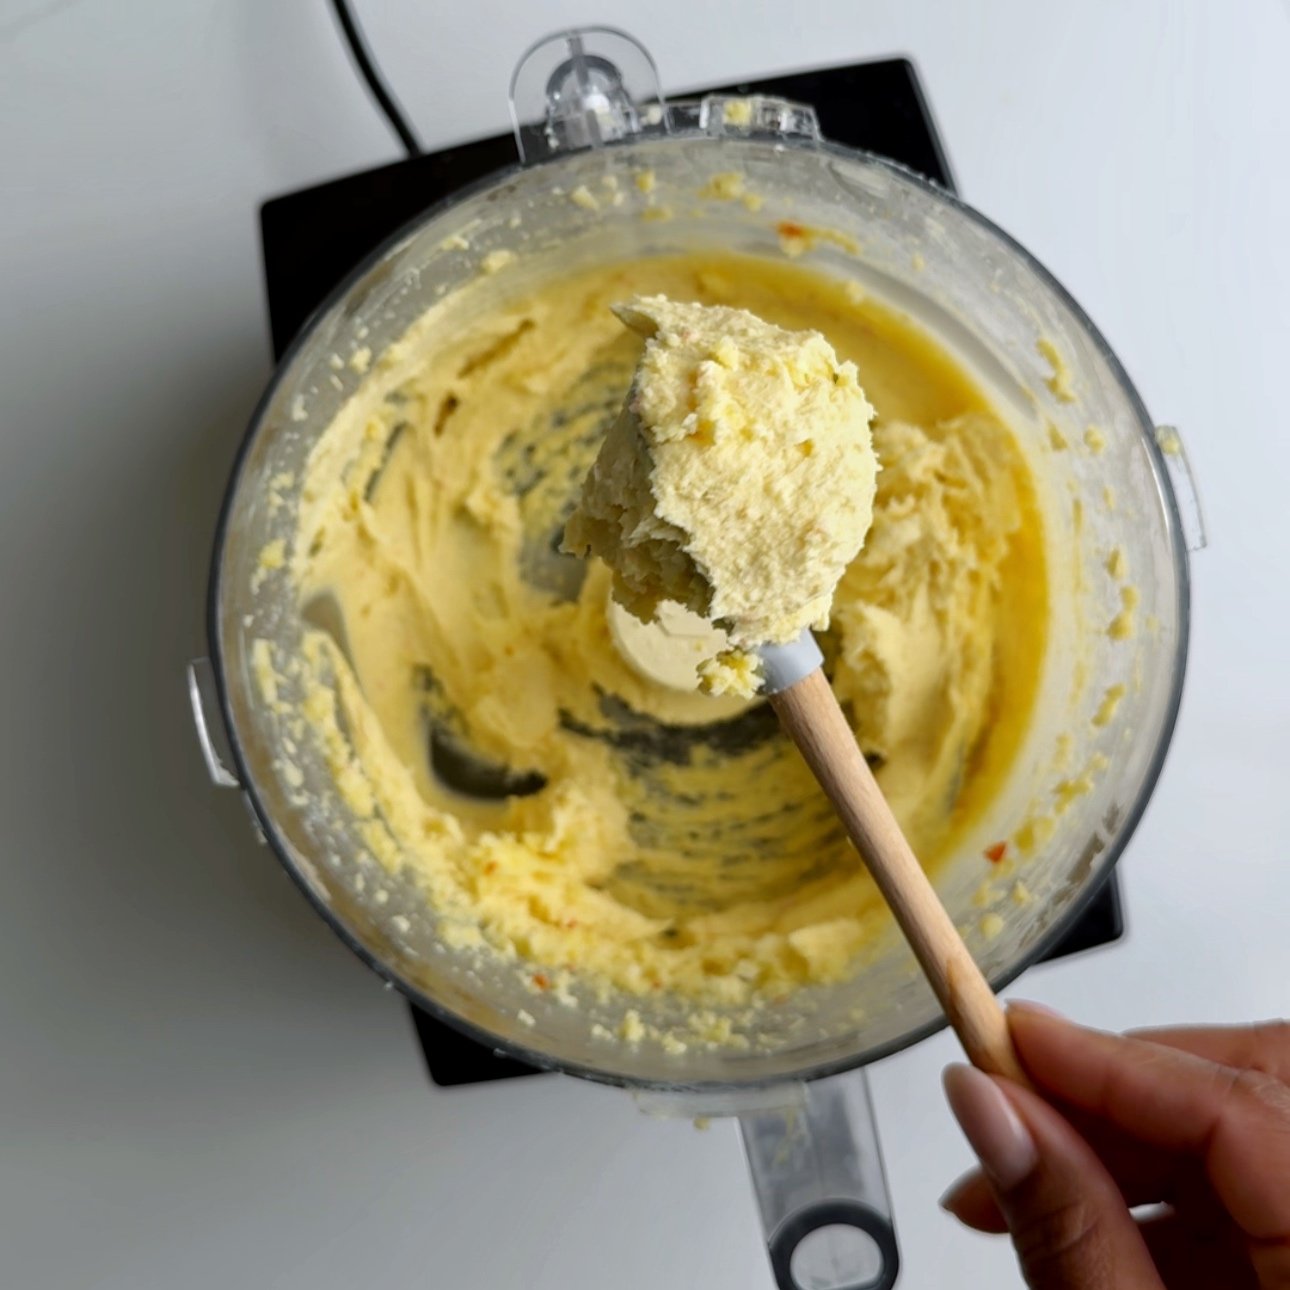 Blending cheese roll filling being scooped out of a food processor